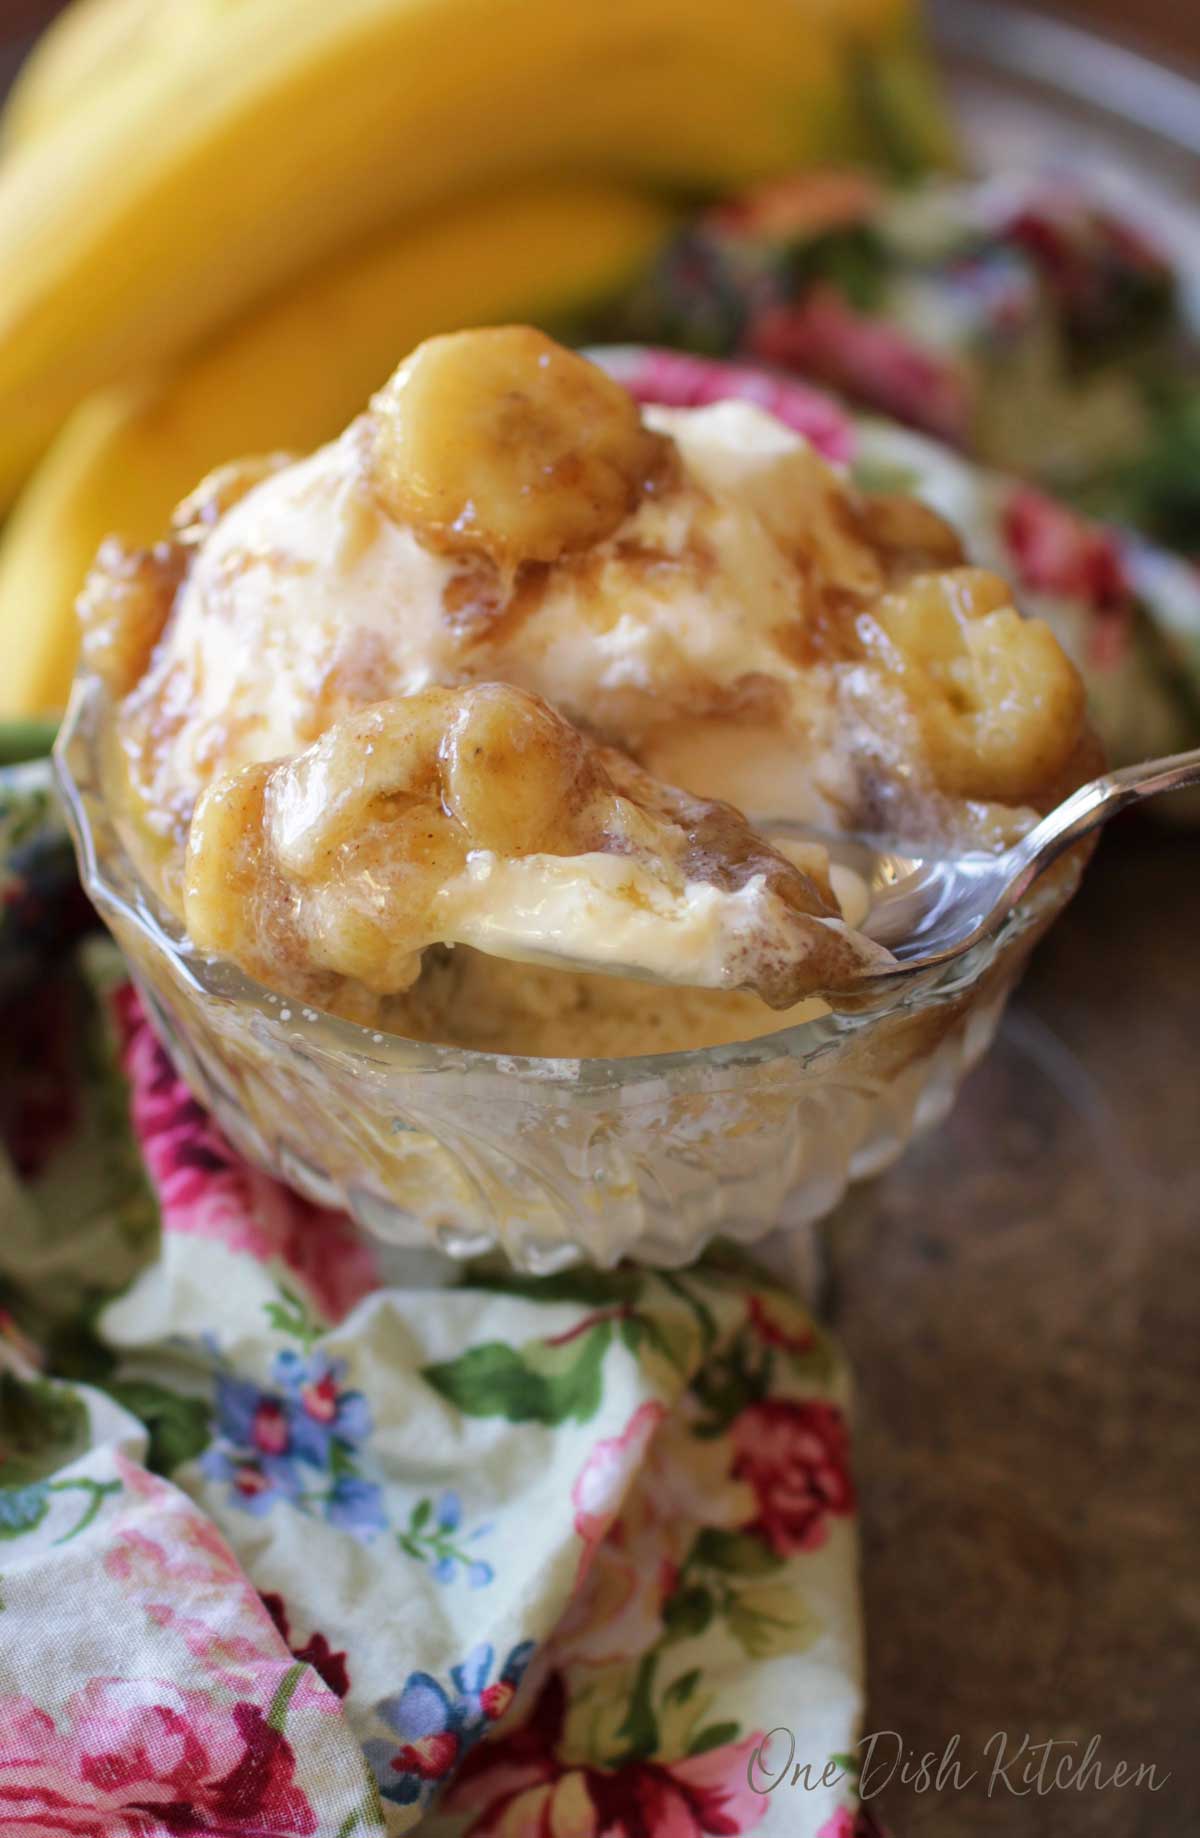 A spoonful of vanilla ice cream that is topped with bananas mixed with brown sugar, butter and vanilla in a dessert glass on a metal tray with a floral cloth napkin and a bunch of bananas.